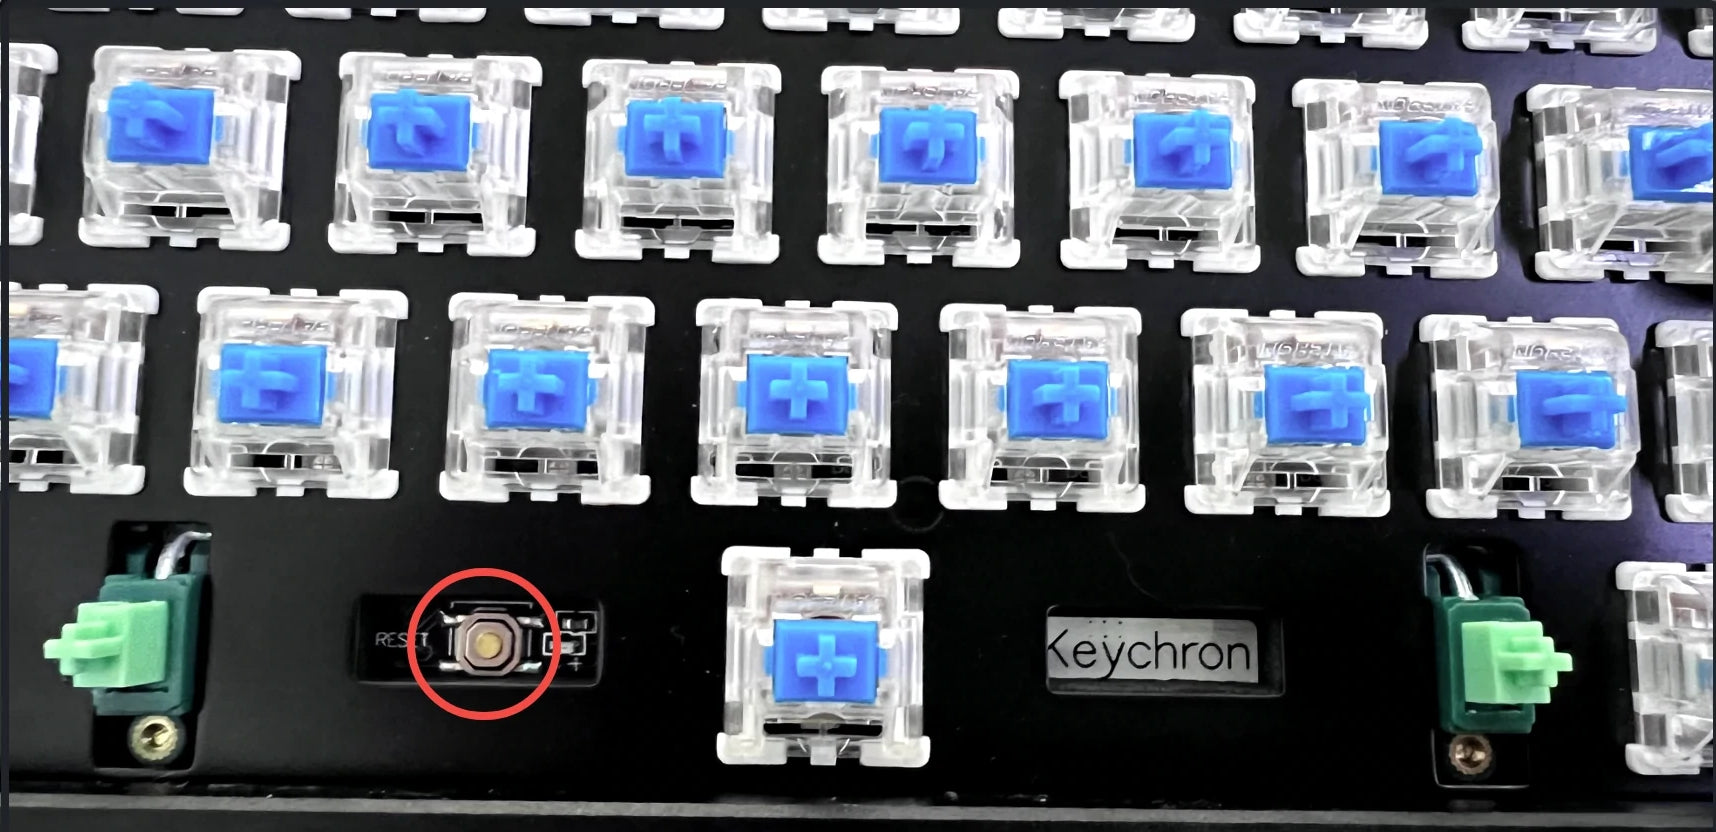 Remove the space bar keycap to find the reset button on the left side of the space bar switch on the PCB.